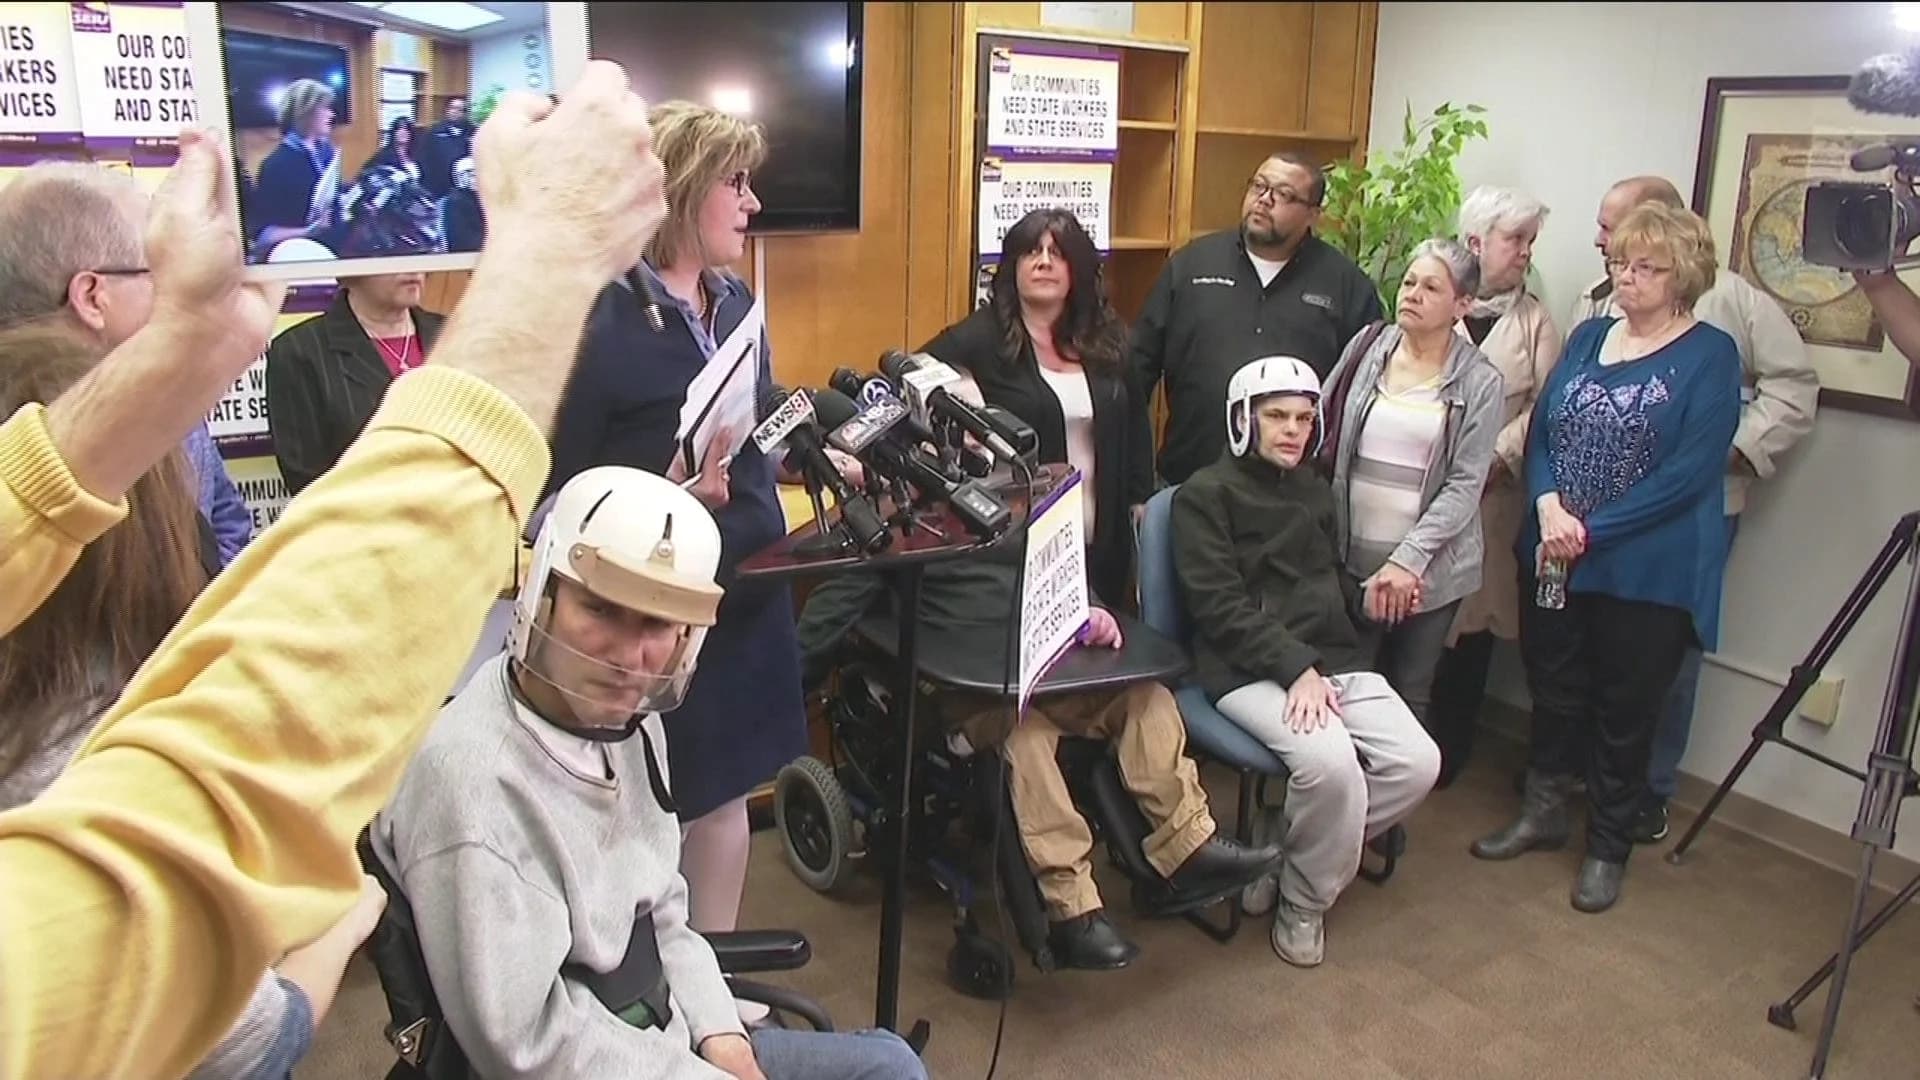 Parents of disabled children plea to stop state layoffs